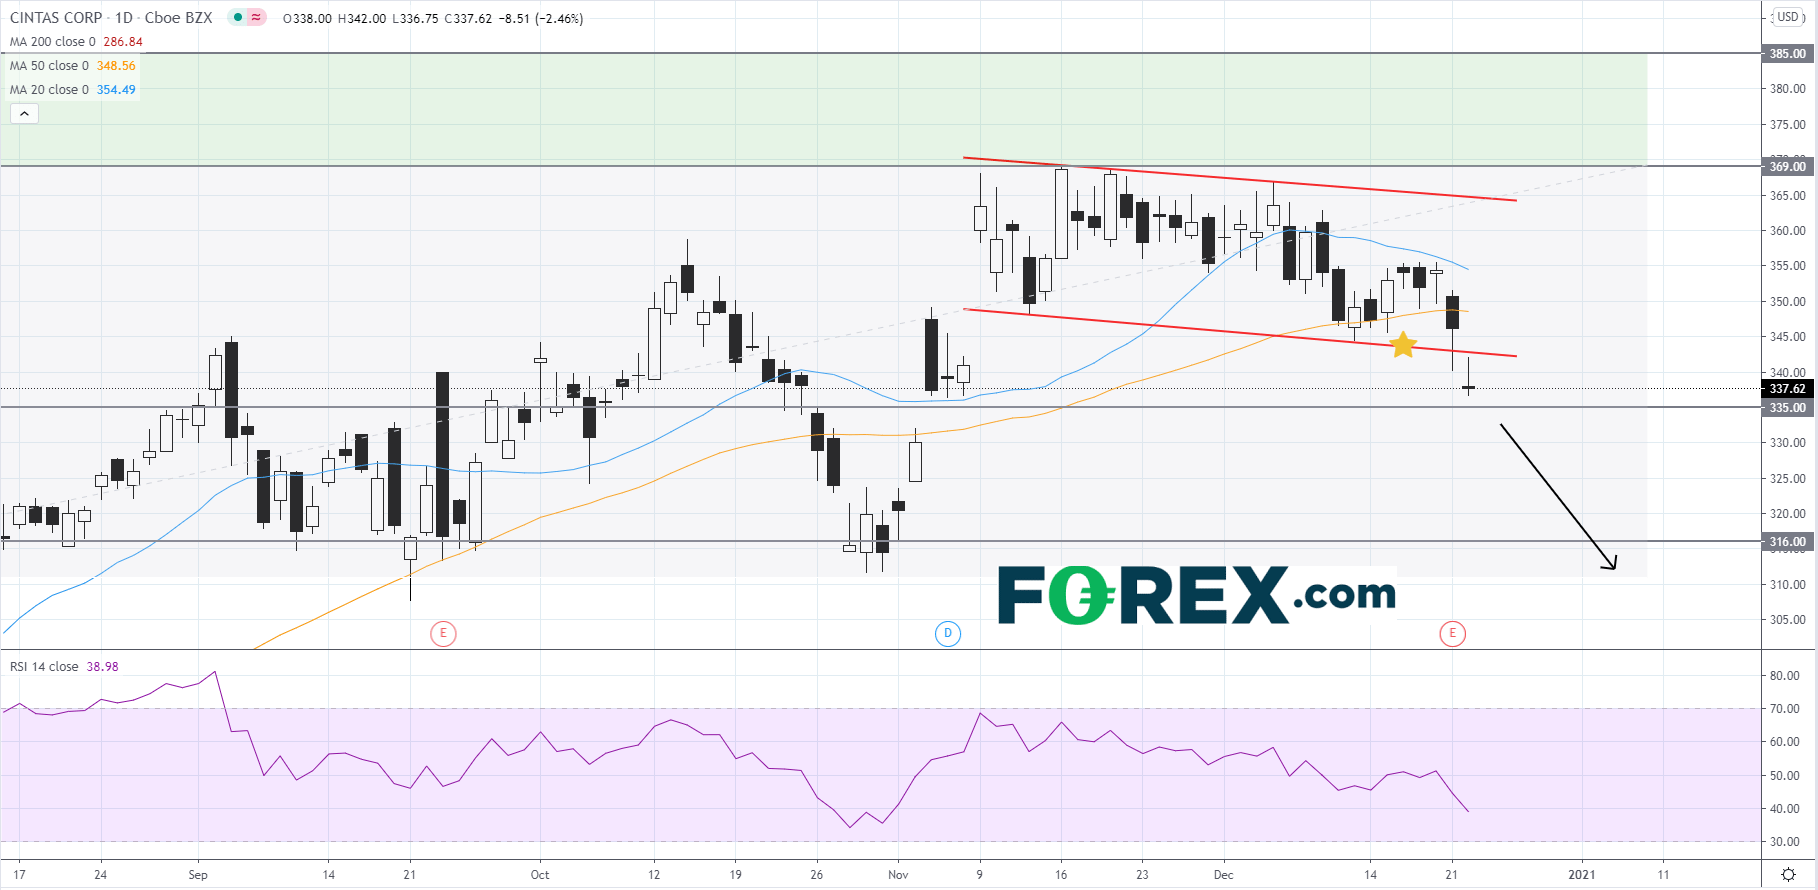 Chart analysis of Cintas. Published in December 2020 by FOREX.com